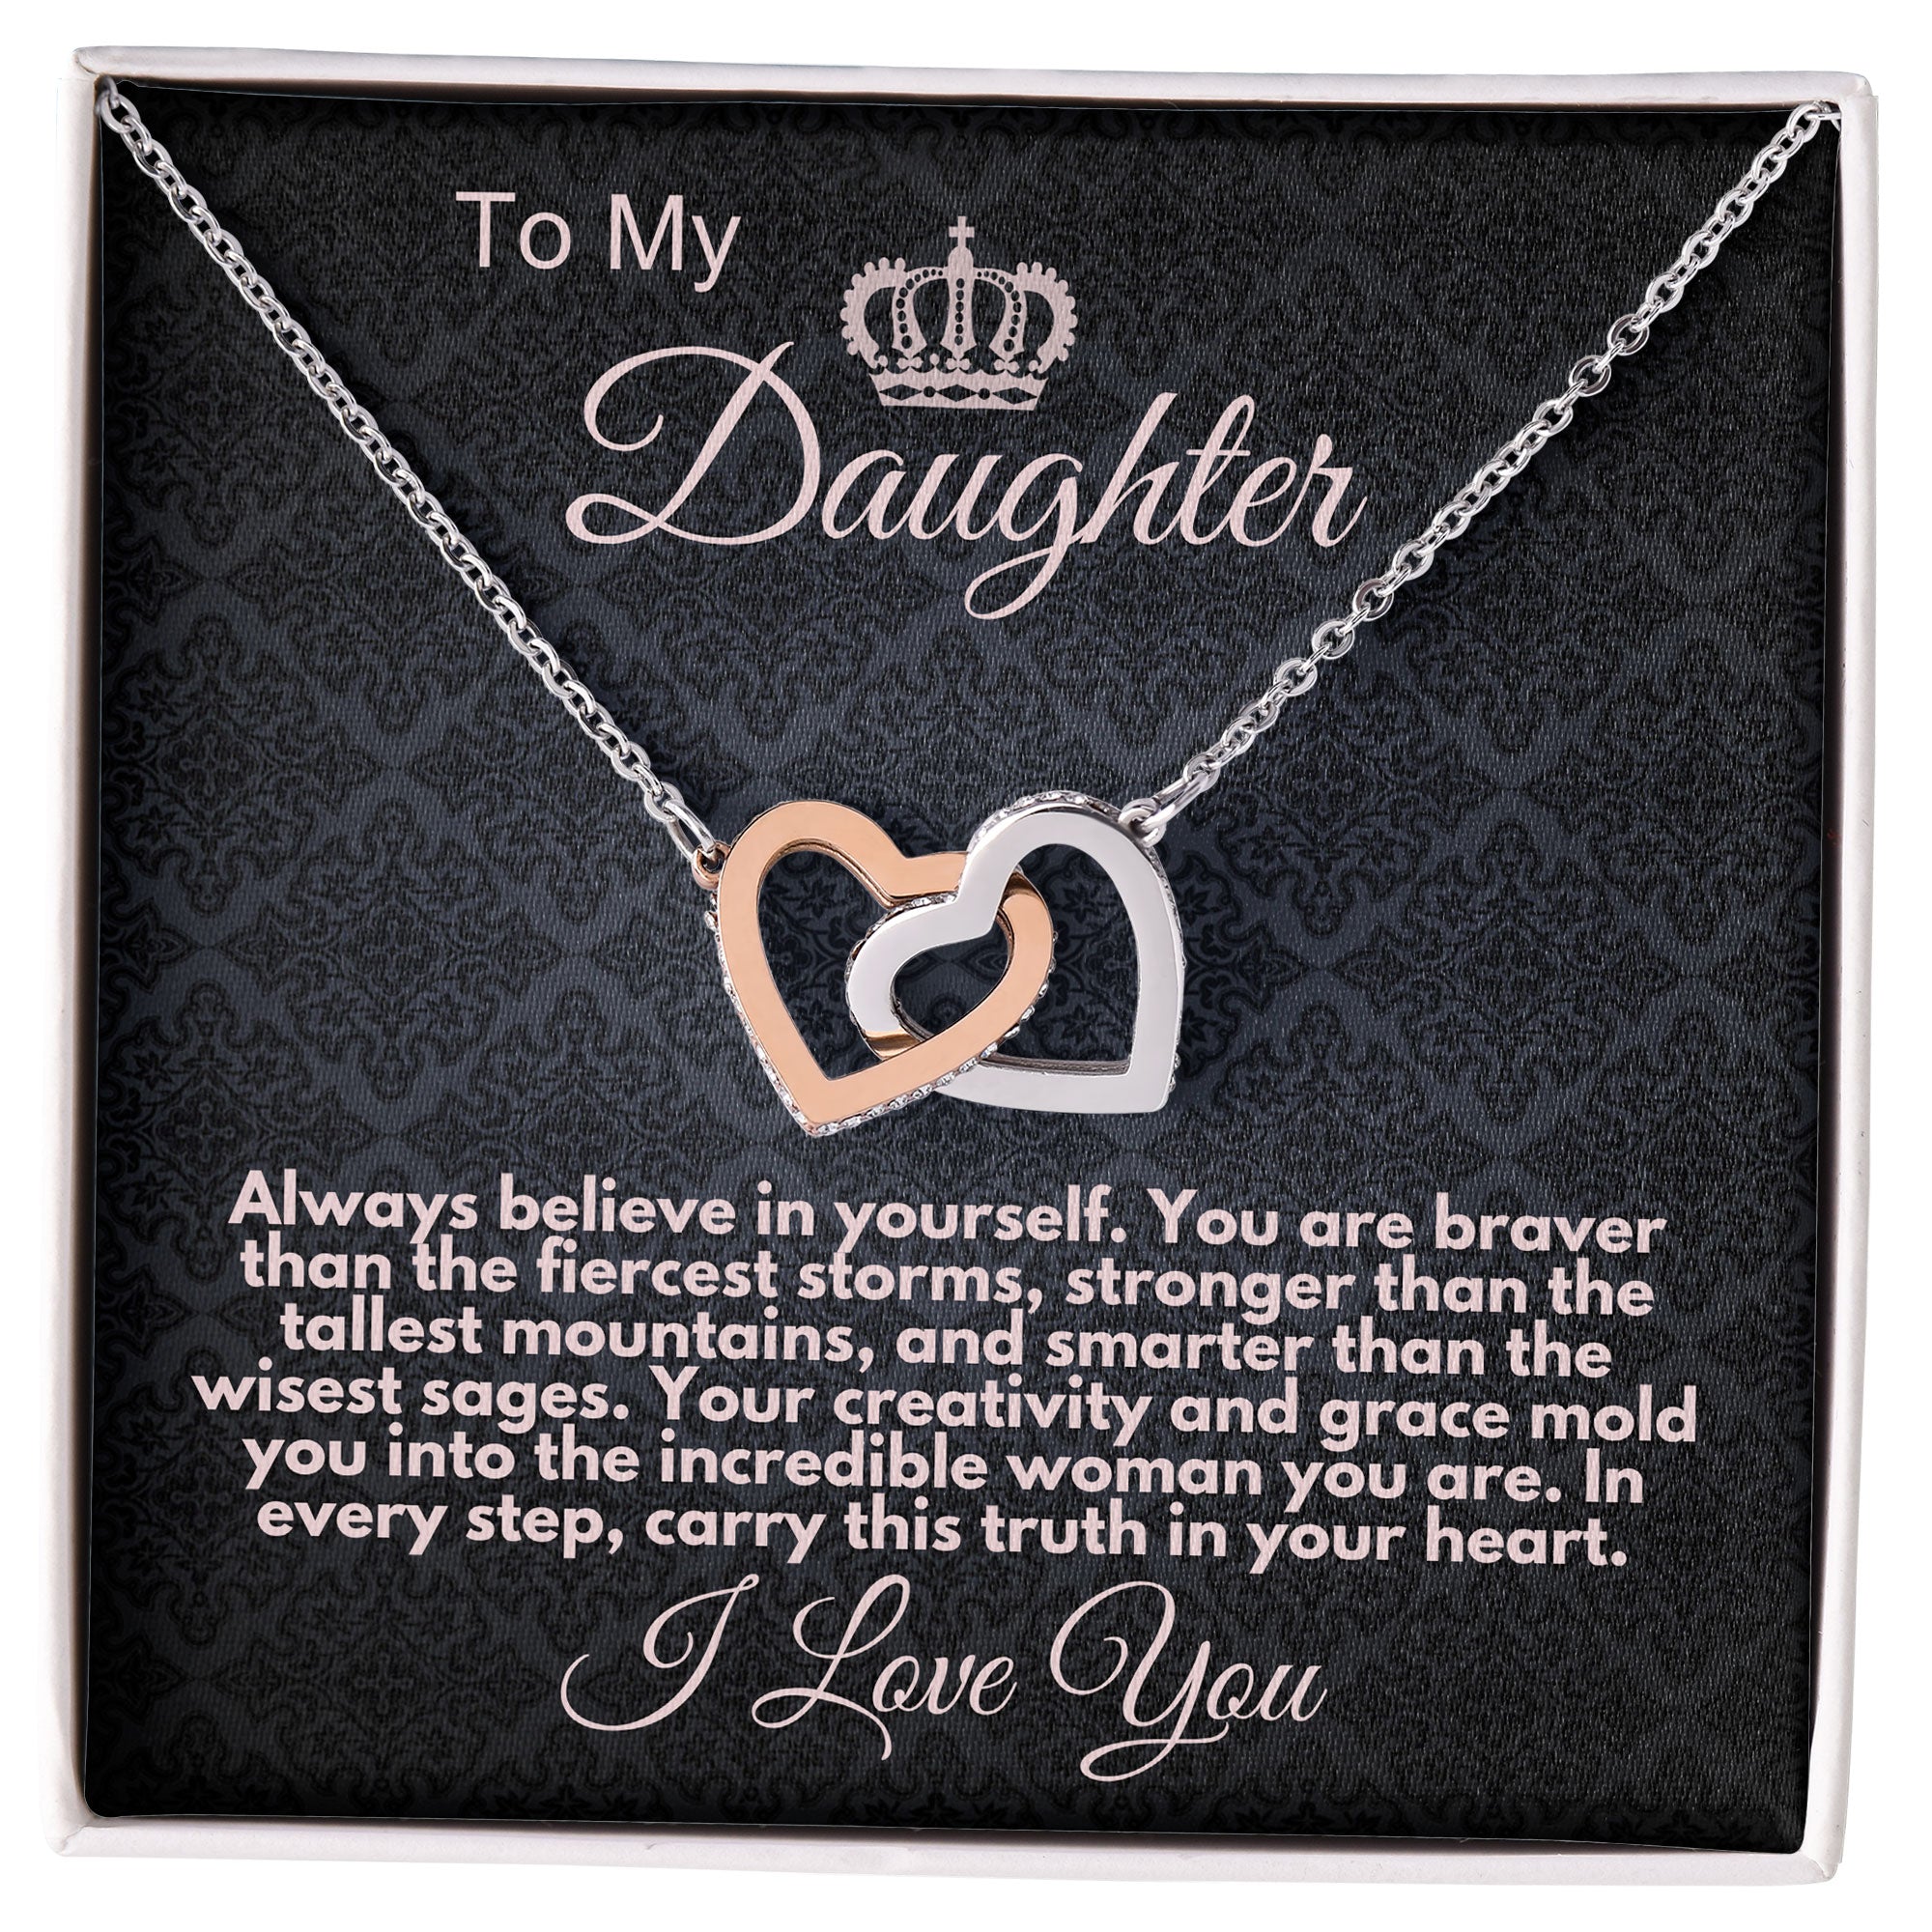 Believe in Yourself - A Loving Reminder for My Daughter